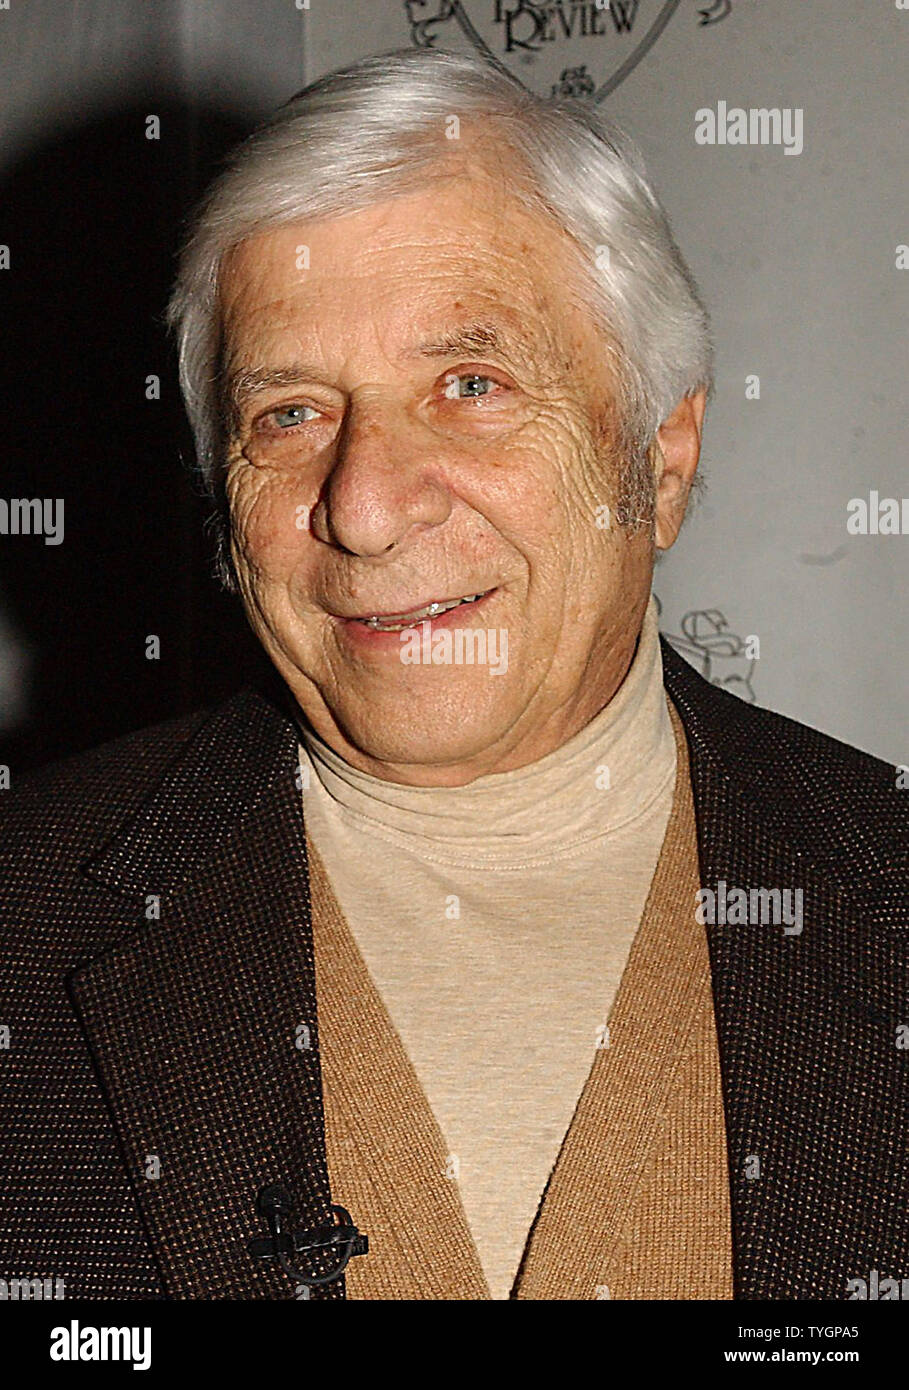 Noted Oscar Award film composer Elmer Bernstein died on August 18, 2004 in California at the age of 82. Bernstein most memorable melody was the  march for the film 'The Magnificient Seven' which was later used in tv ads for Marlboro cigarettes.Bernstein was nominated 14 times for the Academy Award most recently in 2002 for 'Far From Heaven'   FILE: Jan. 2003  (UPI Photo/Ezio Petersen) Stock Photo